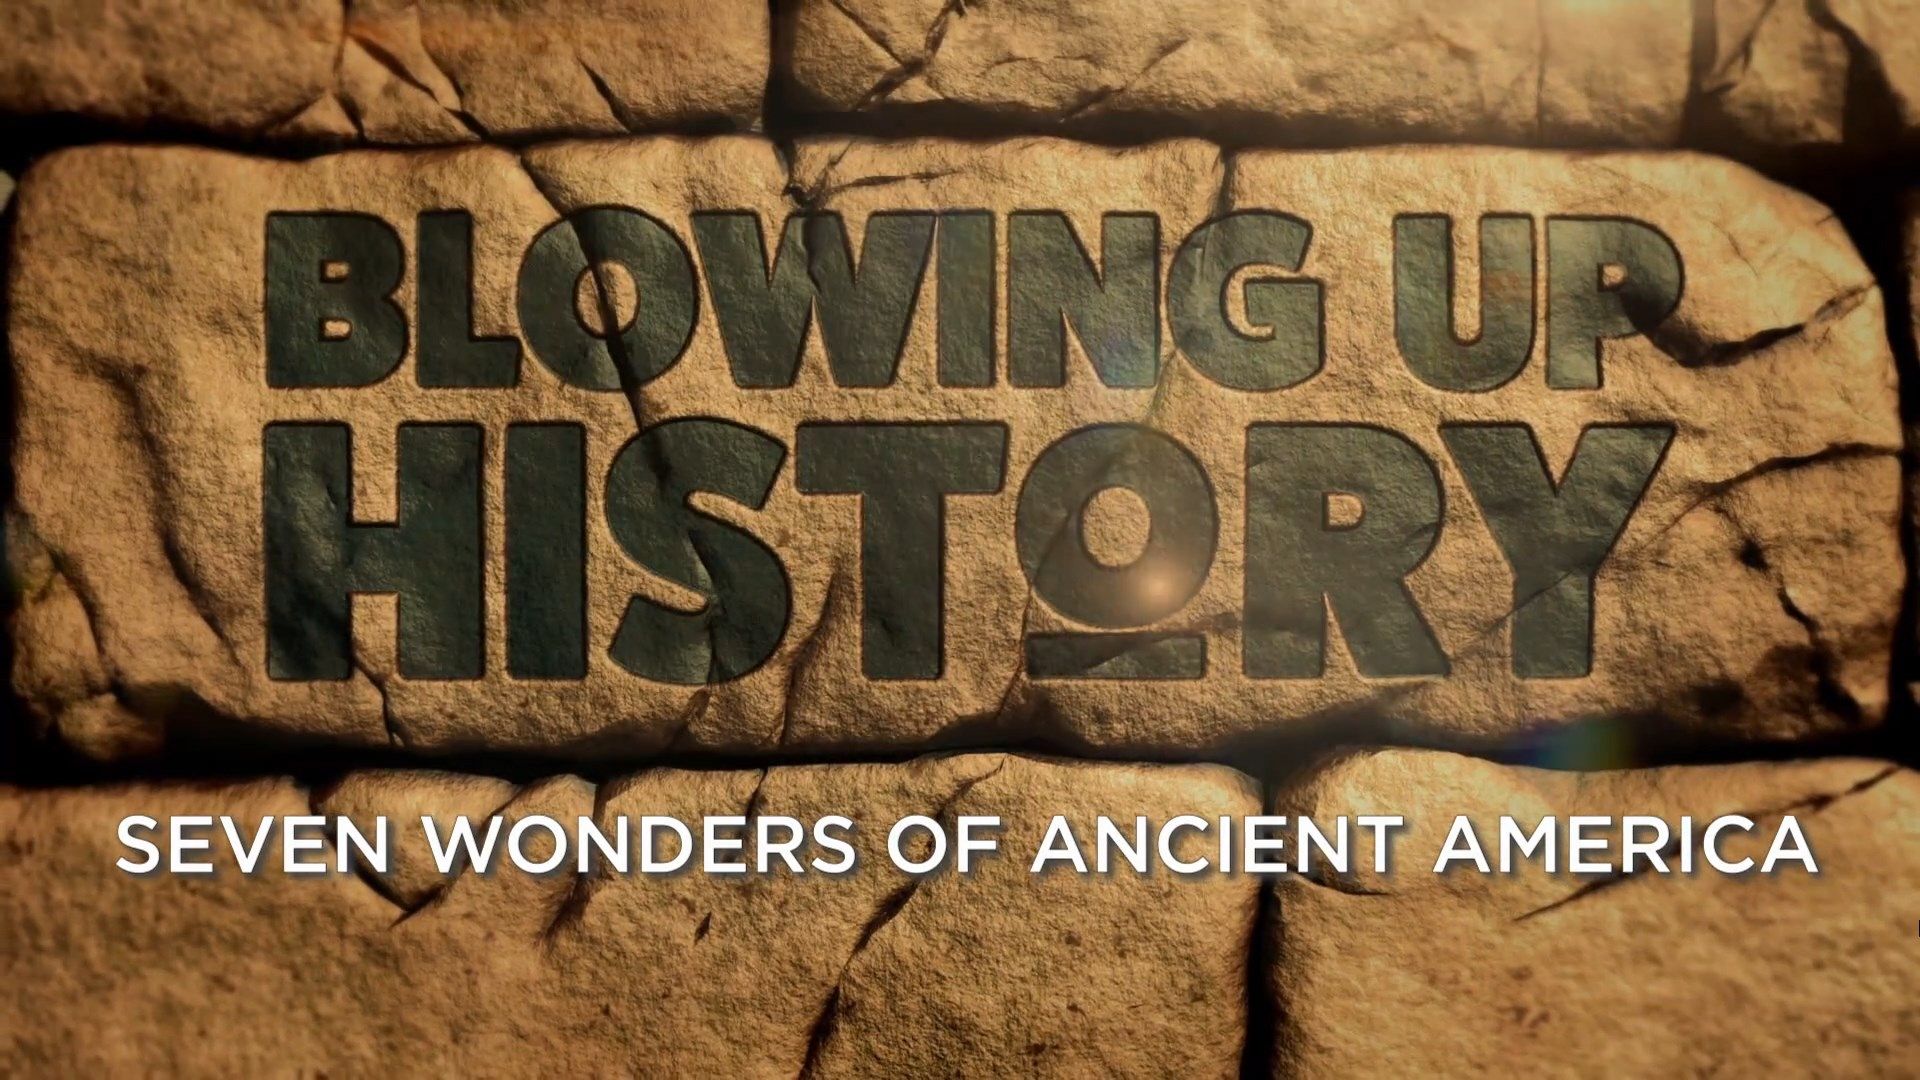 Blowing Up History: Seven Wonders background